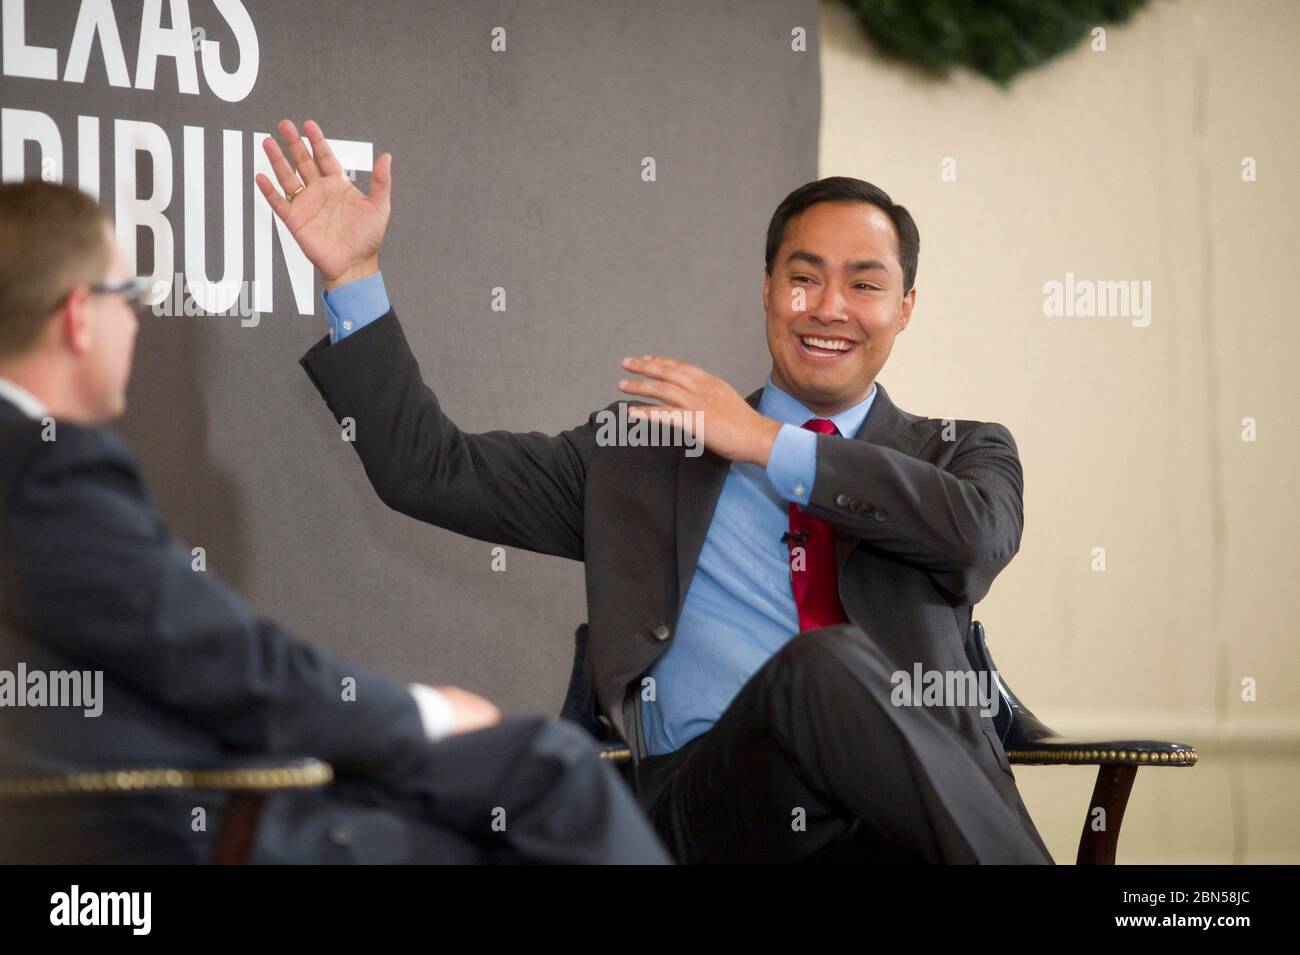 Austin Texas USA, December 1 2011: Hispanic politician Joaquin Castro of San Antonio speaks to Evan Smith at a Texas Tribune event. the Stanford and Harvard educated Castro, 37, has announced his intentions to run for United State Senate in 2012. His twin brother, Julian, is the mayor of San Antonio. ©Bob Daemmrich Stock Photo